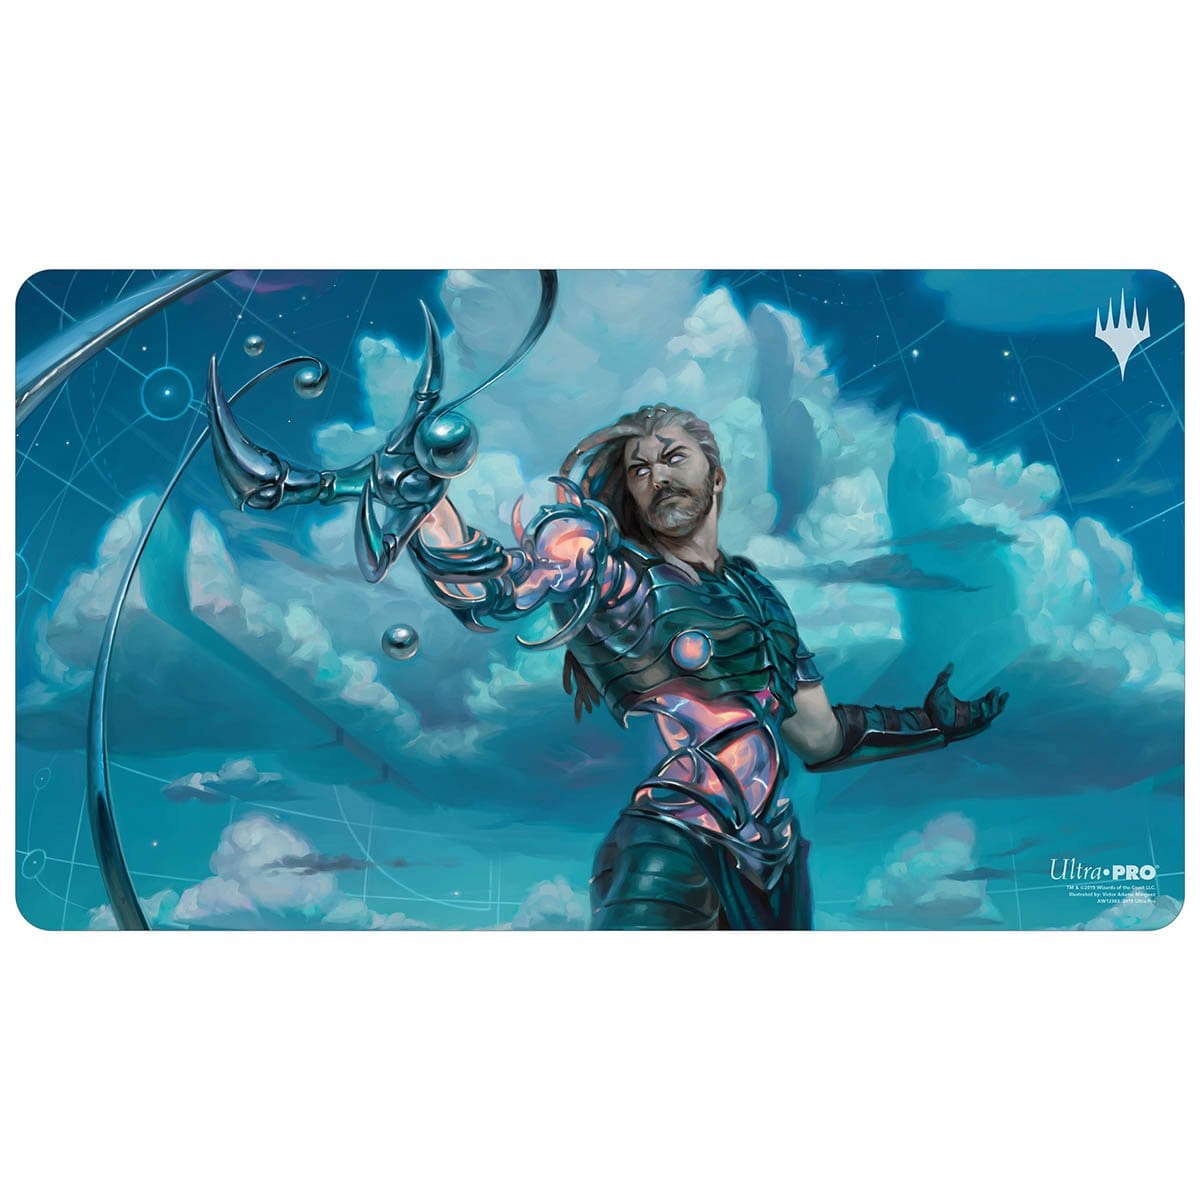 Tezzeret the Seeker Playmat - Playmat - Original Magic Art - Accessories for Magic the Gathering and other card games